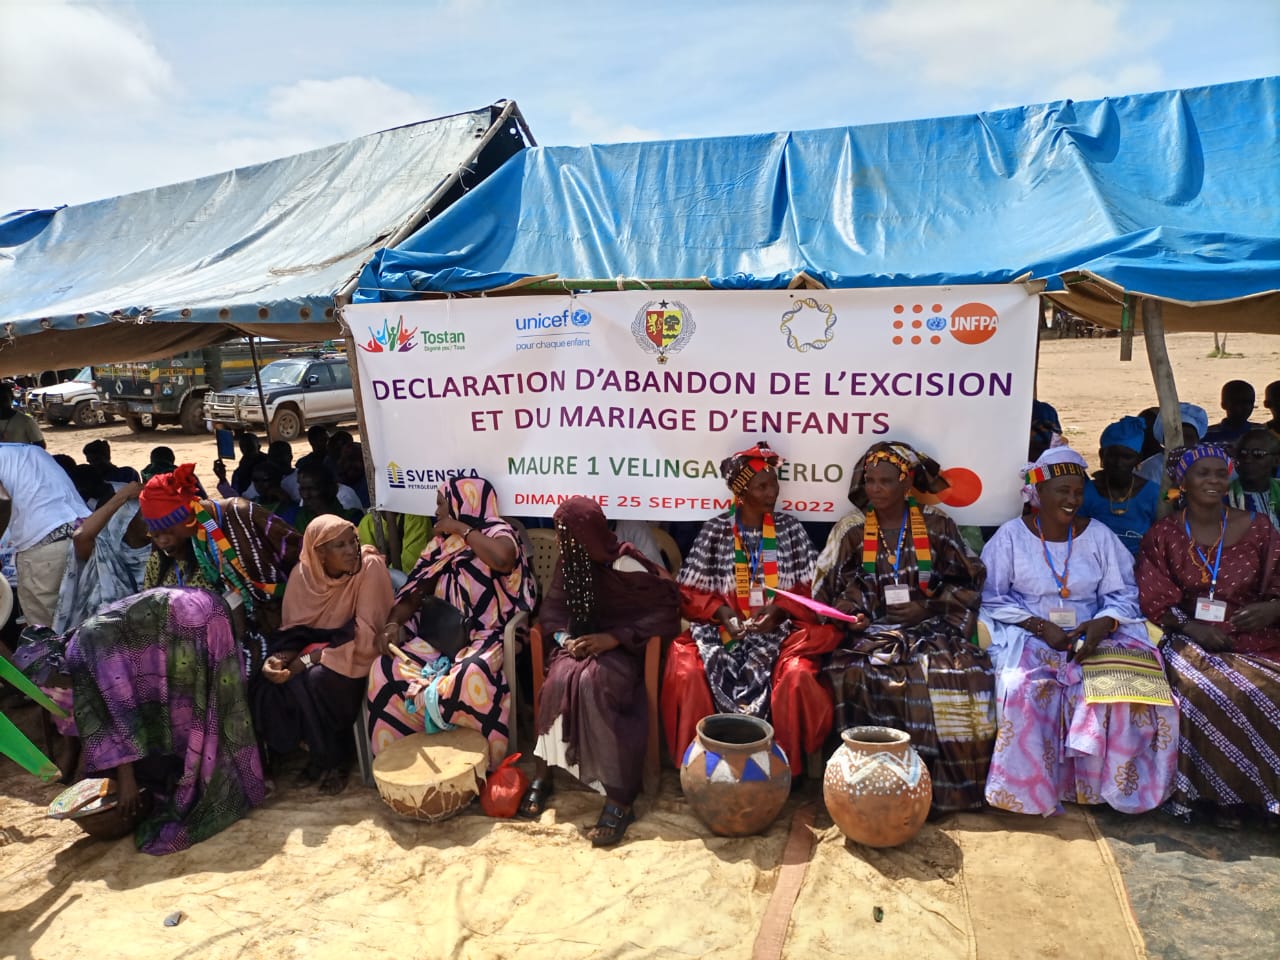 Public declaration for abandonment of female genital cutting and child marriage in Senegal